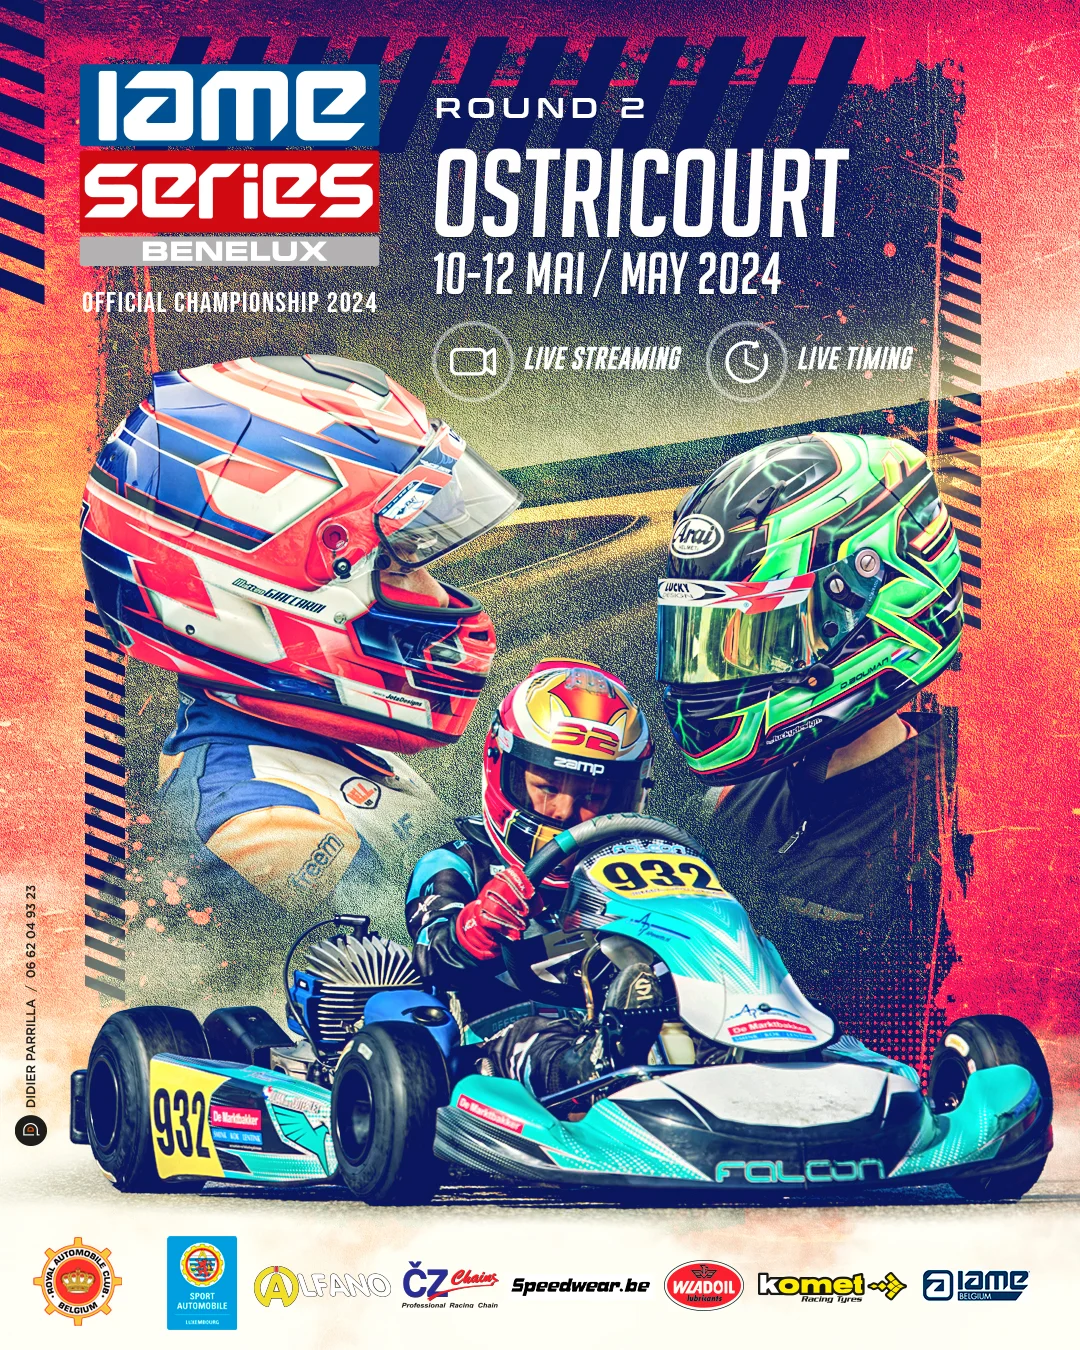 Round 2 of IAME Series Benelux Brings Exciting Karting Action to Ostricourt!